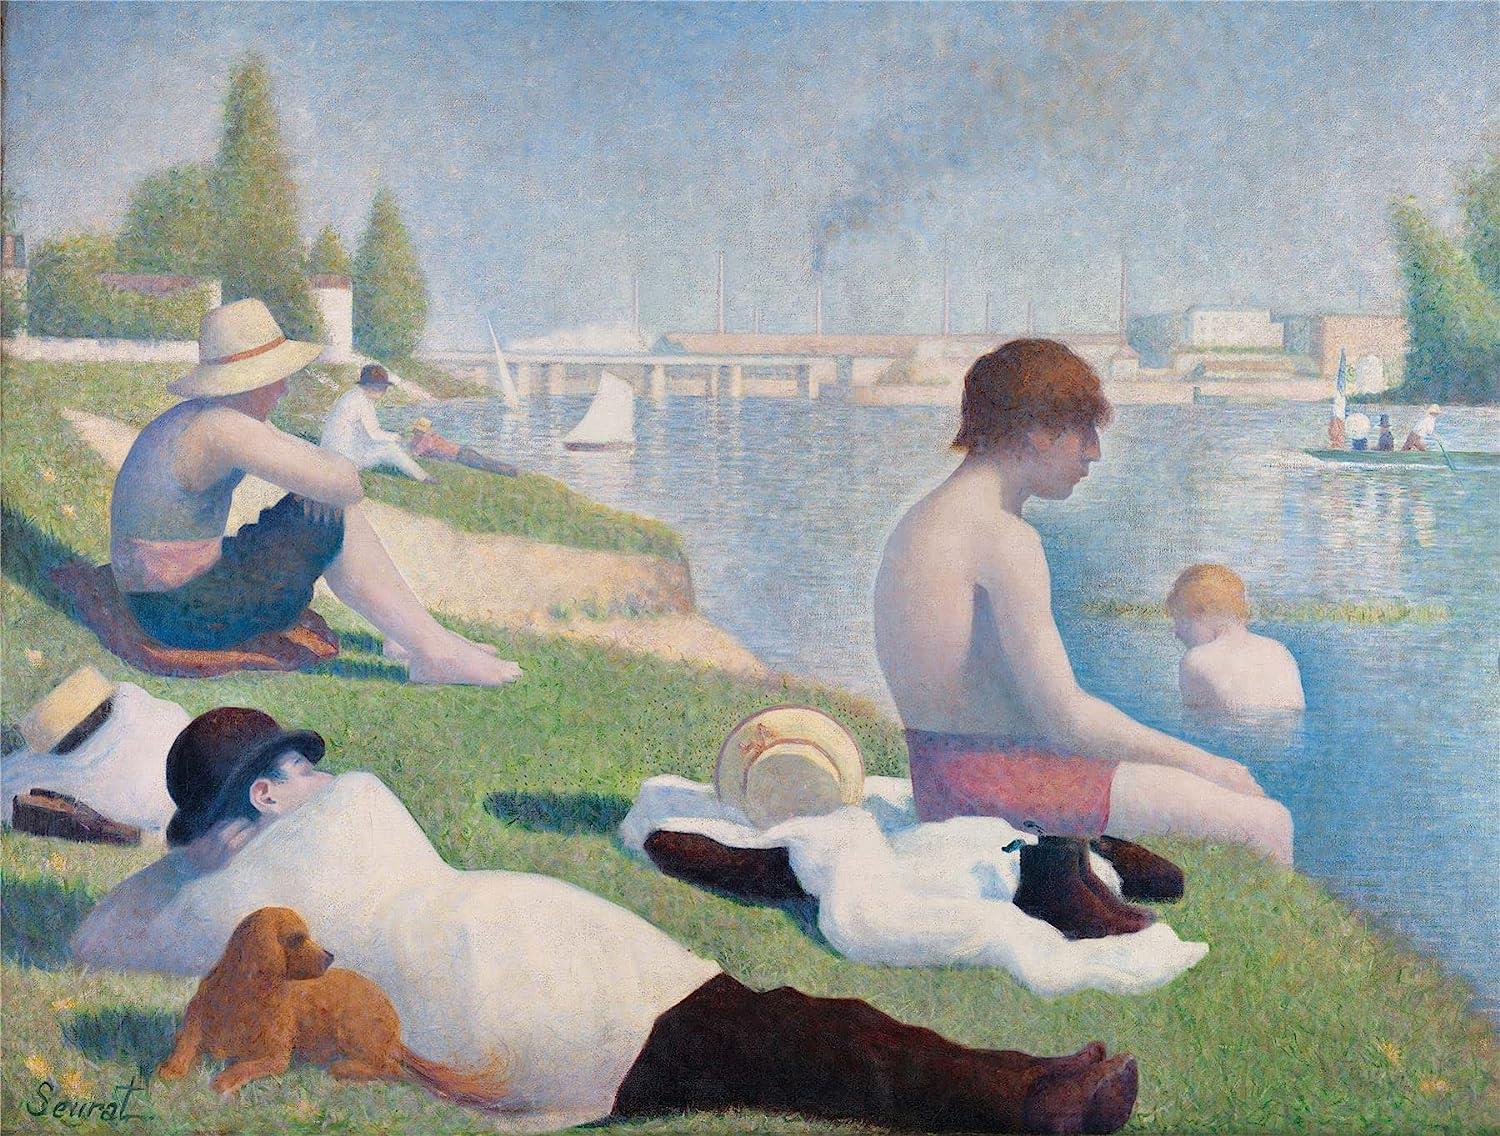 Bathers at Asnieres, Seurat - National Gallery Jigsaw Puzzle (1000 Pieces)